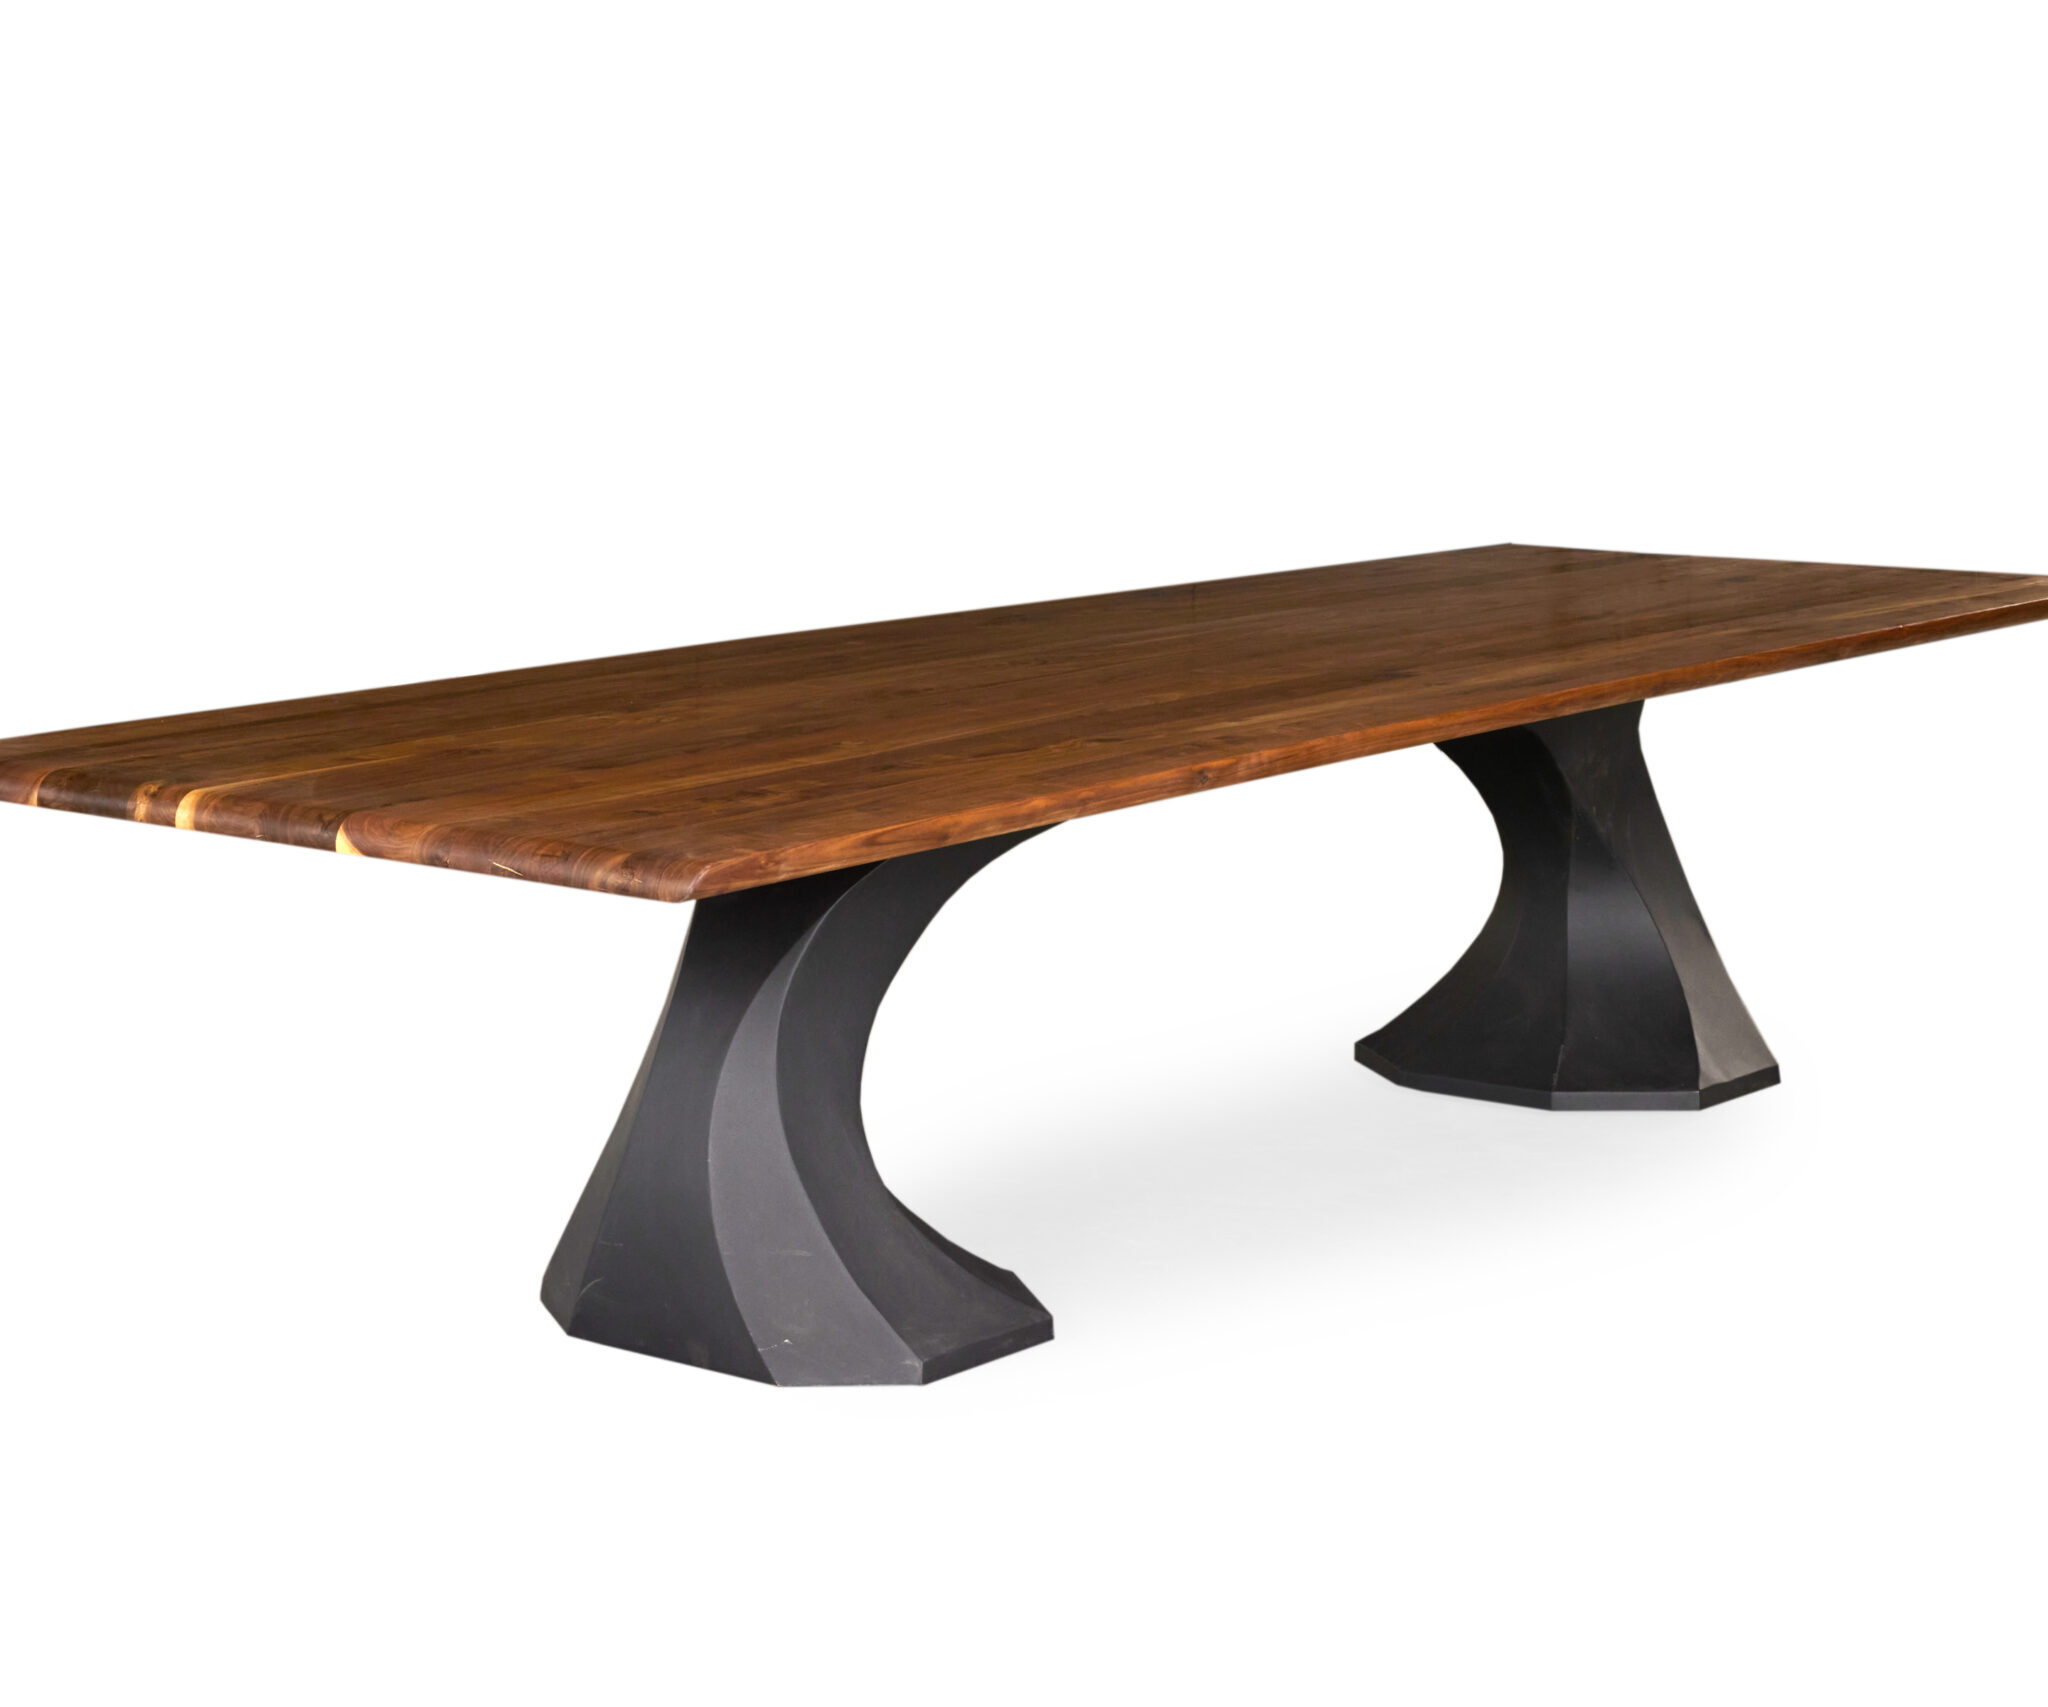 Luxe Dining Table: Walnut timber, dimensions L: 3600mm x W: 1200mm x H: 750mm, Elsternwick edge, natural oil finish, supported by Positano Leg Steel base." This alt text succinctly describes the key features of the table.